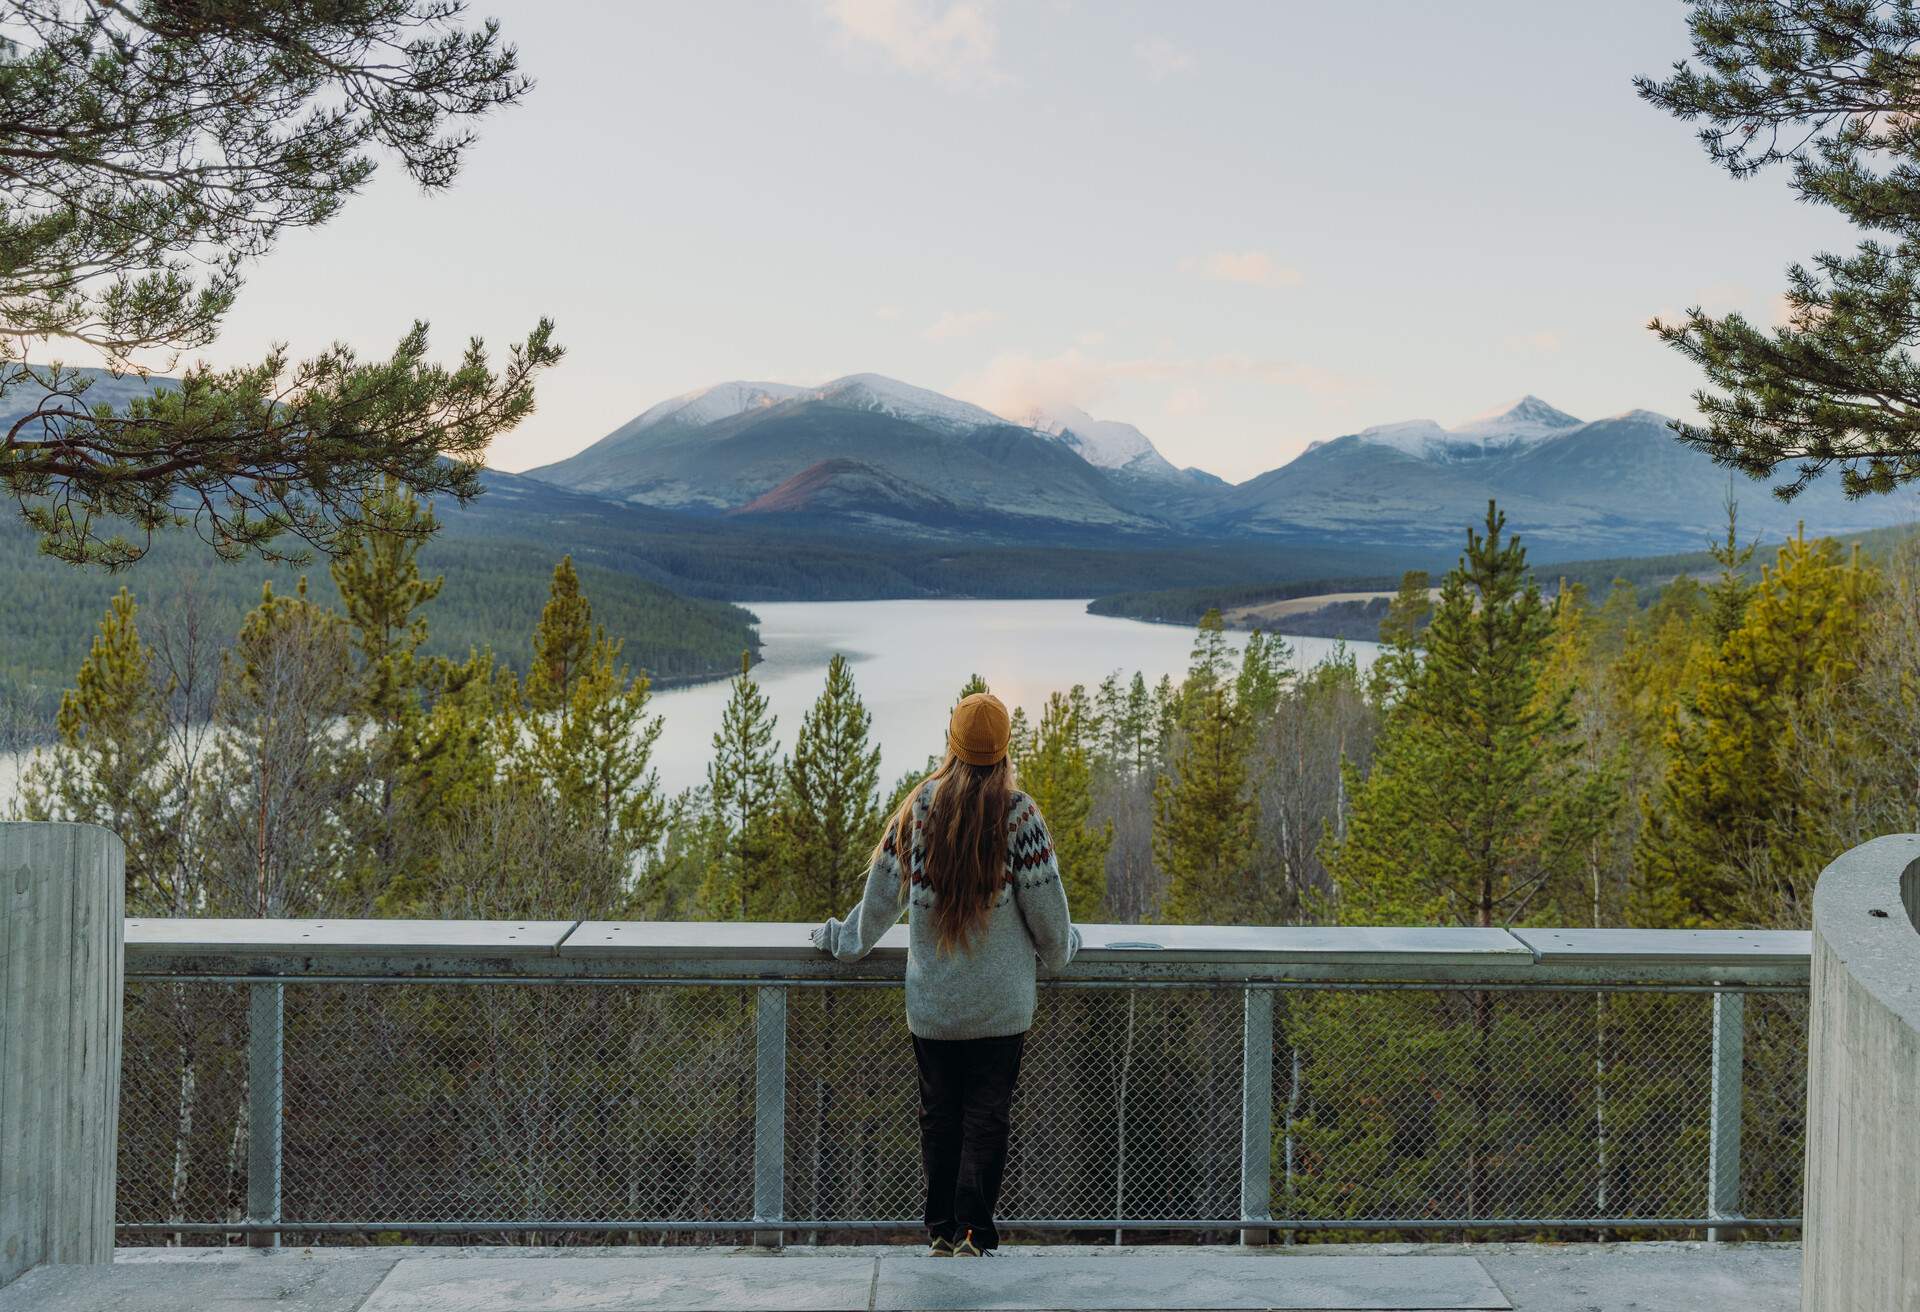 Rear view of female with long hair in yellow hat staying at the viewpoint admiring the scenic mountain landscape with lake and the pine forest during sunset in Rondane National Park